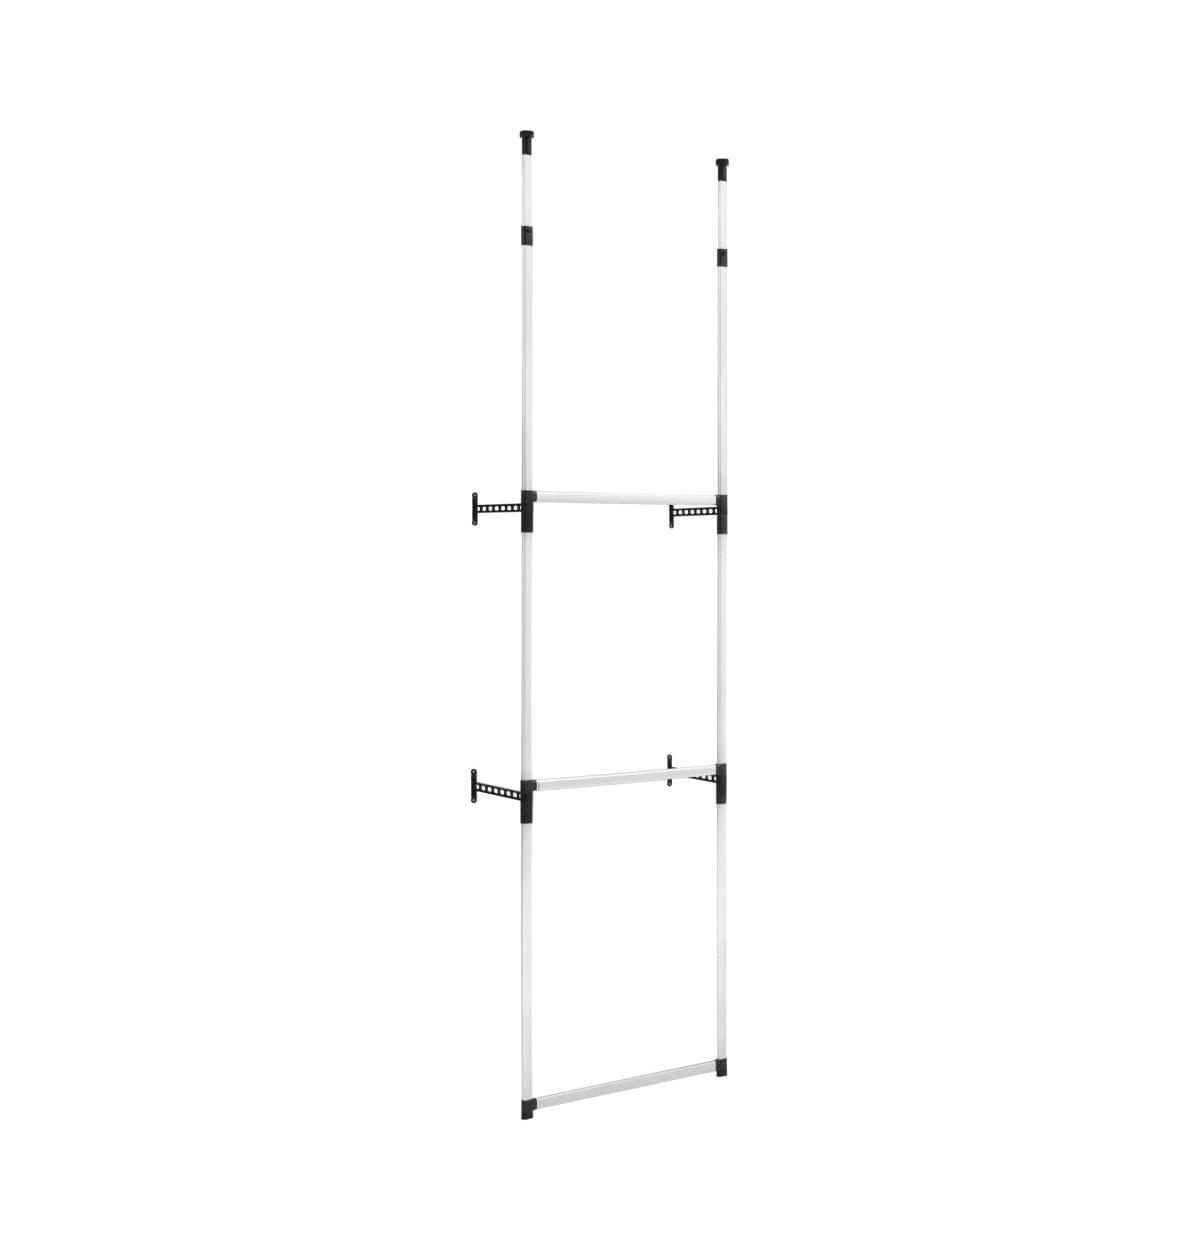 Telescopic Wardrobe System with Rods Aluminum - Silver